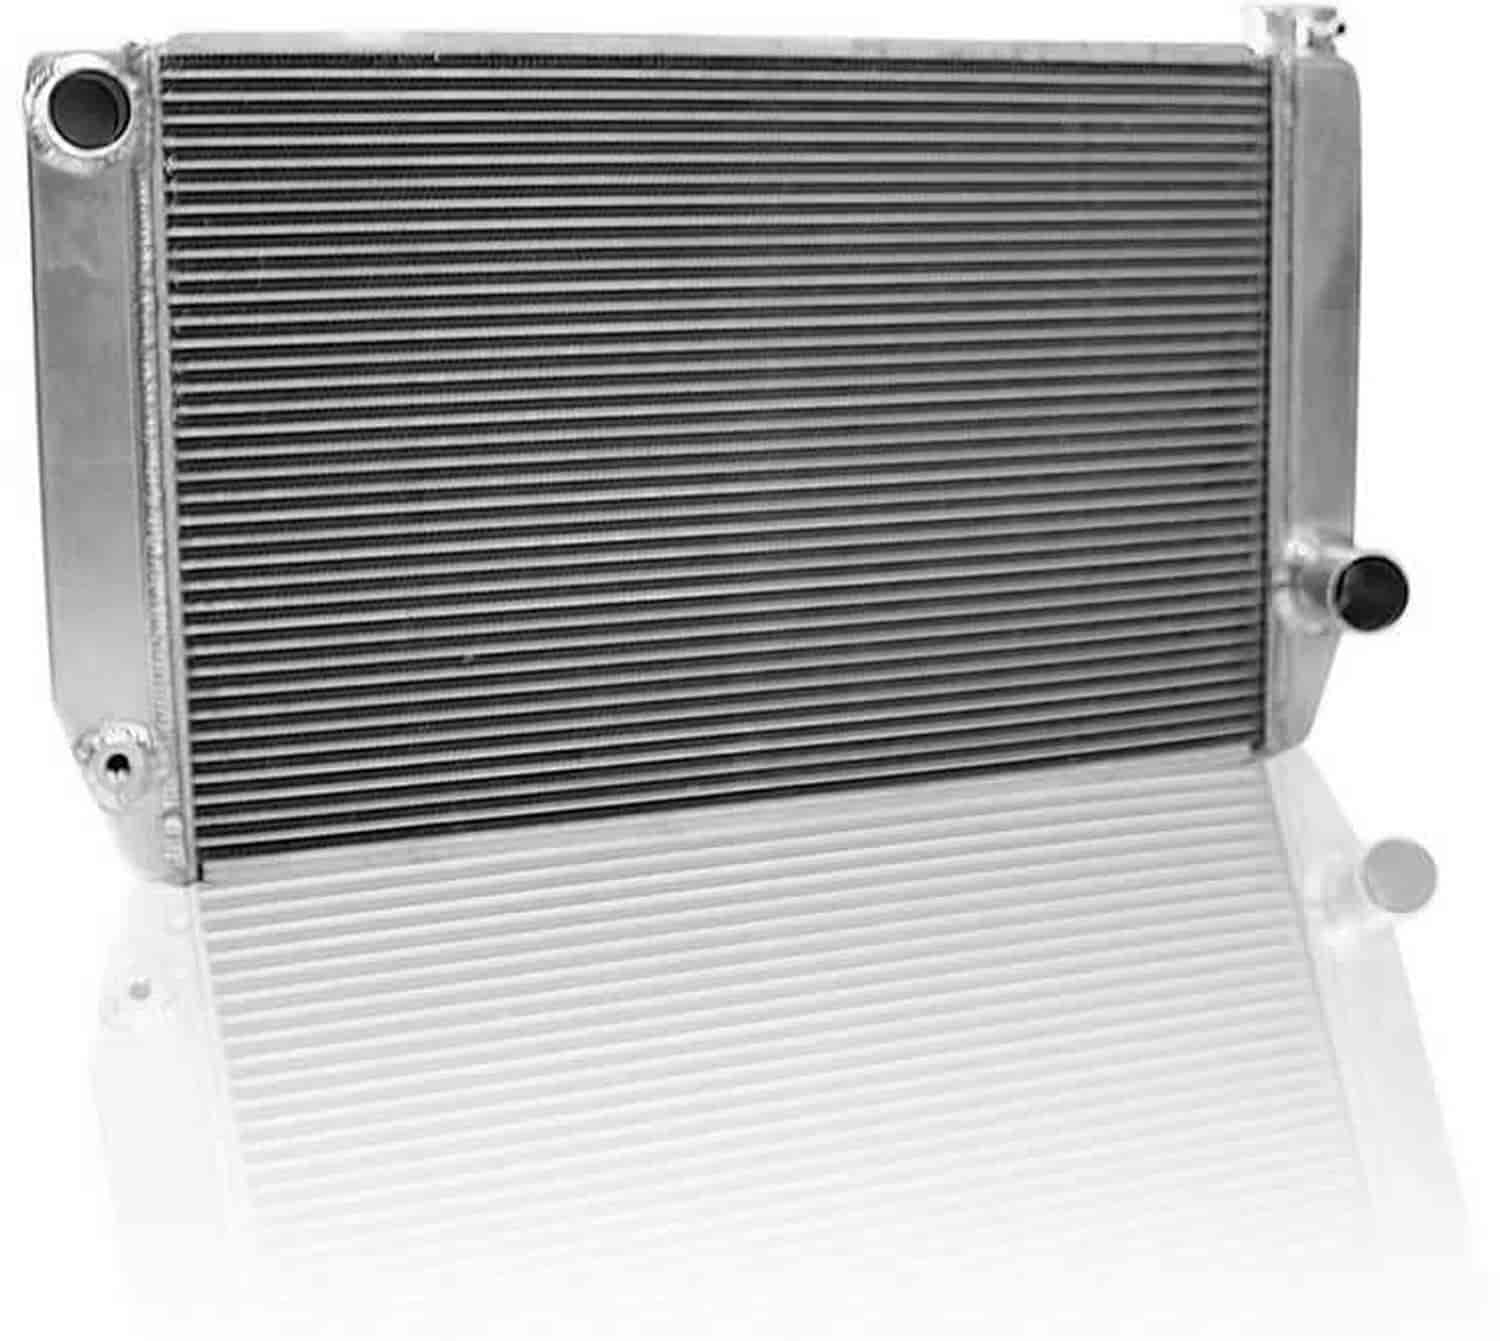 ClassicCool Universal Fit Radiator Single Pass Crossflow Design 31" x 15.50" with Straight Outlet